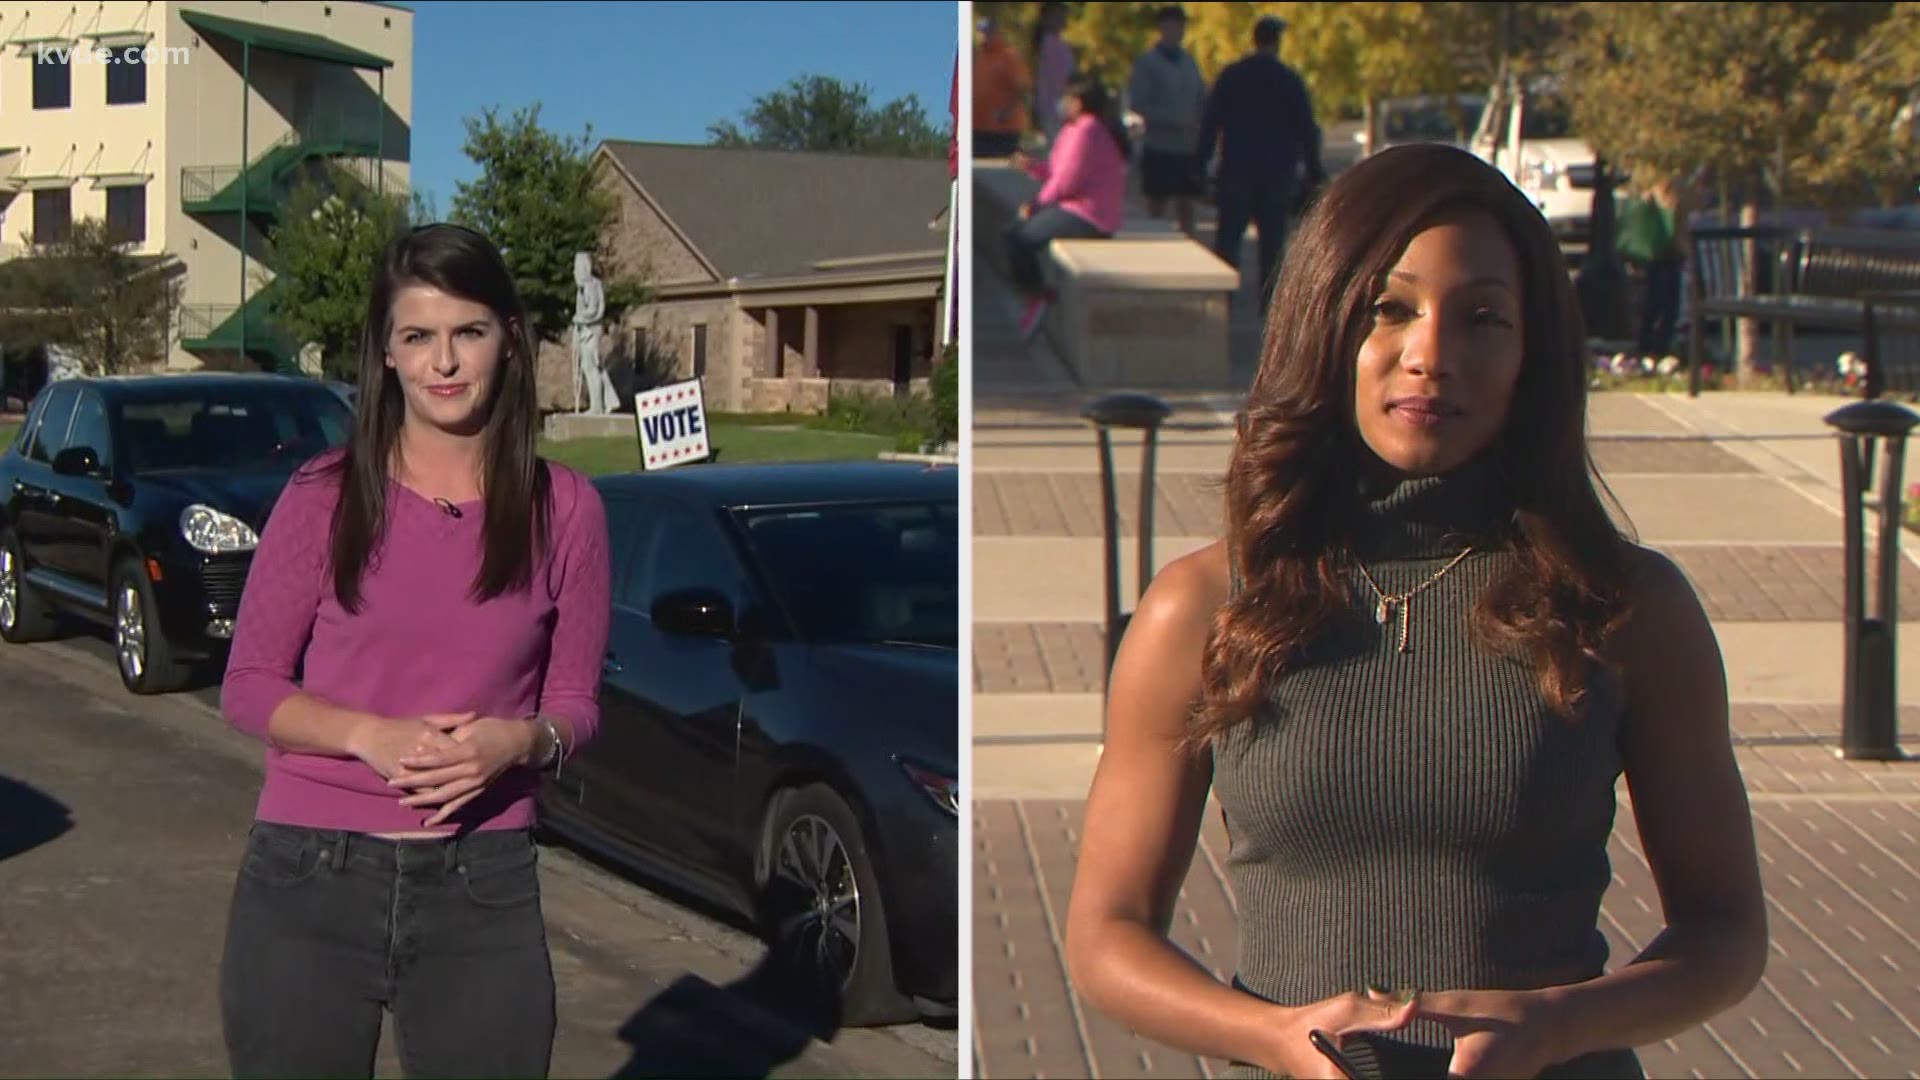 Voters in Travis and Williamson counties turned out in big numbers on Friday for the last day of early voting. KVUE spoke with some voters outside the polls.